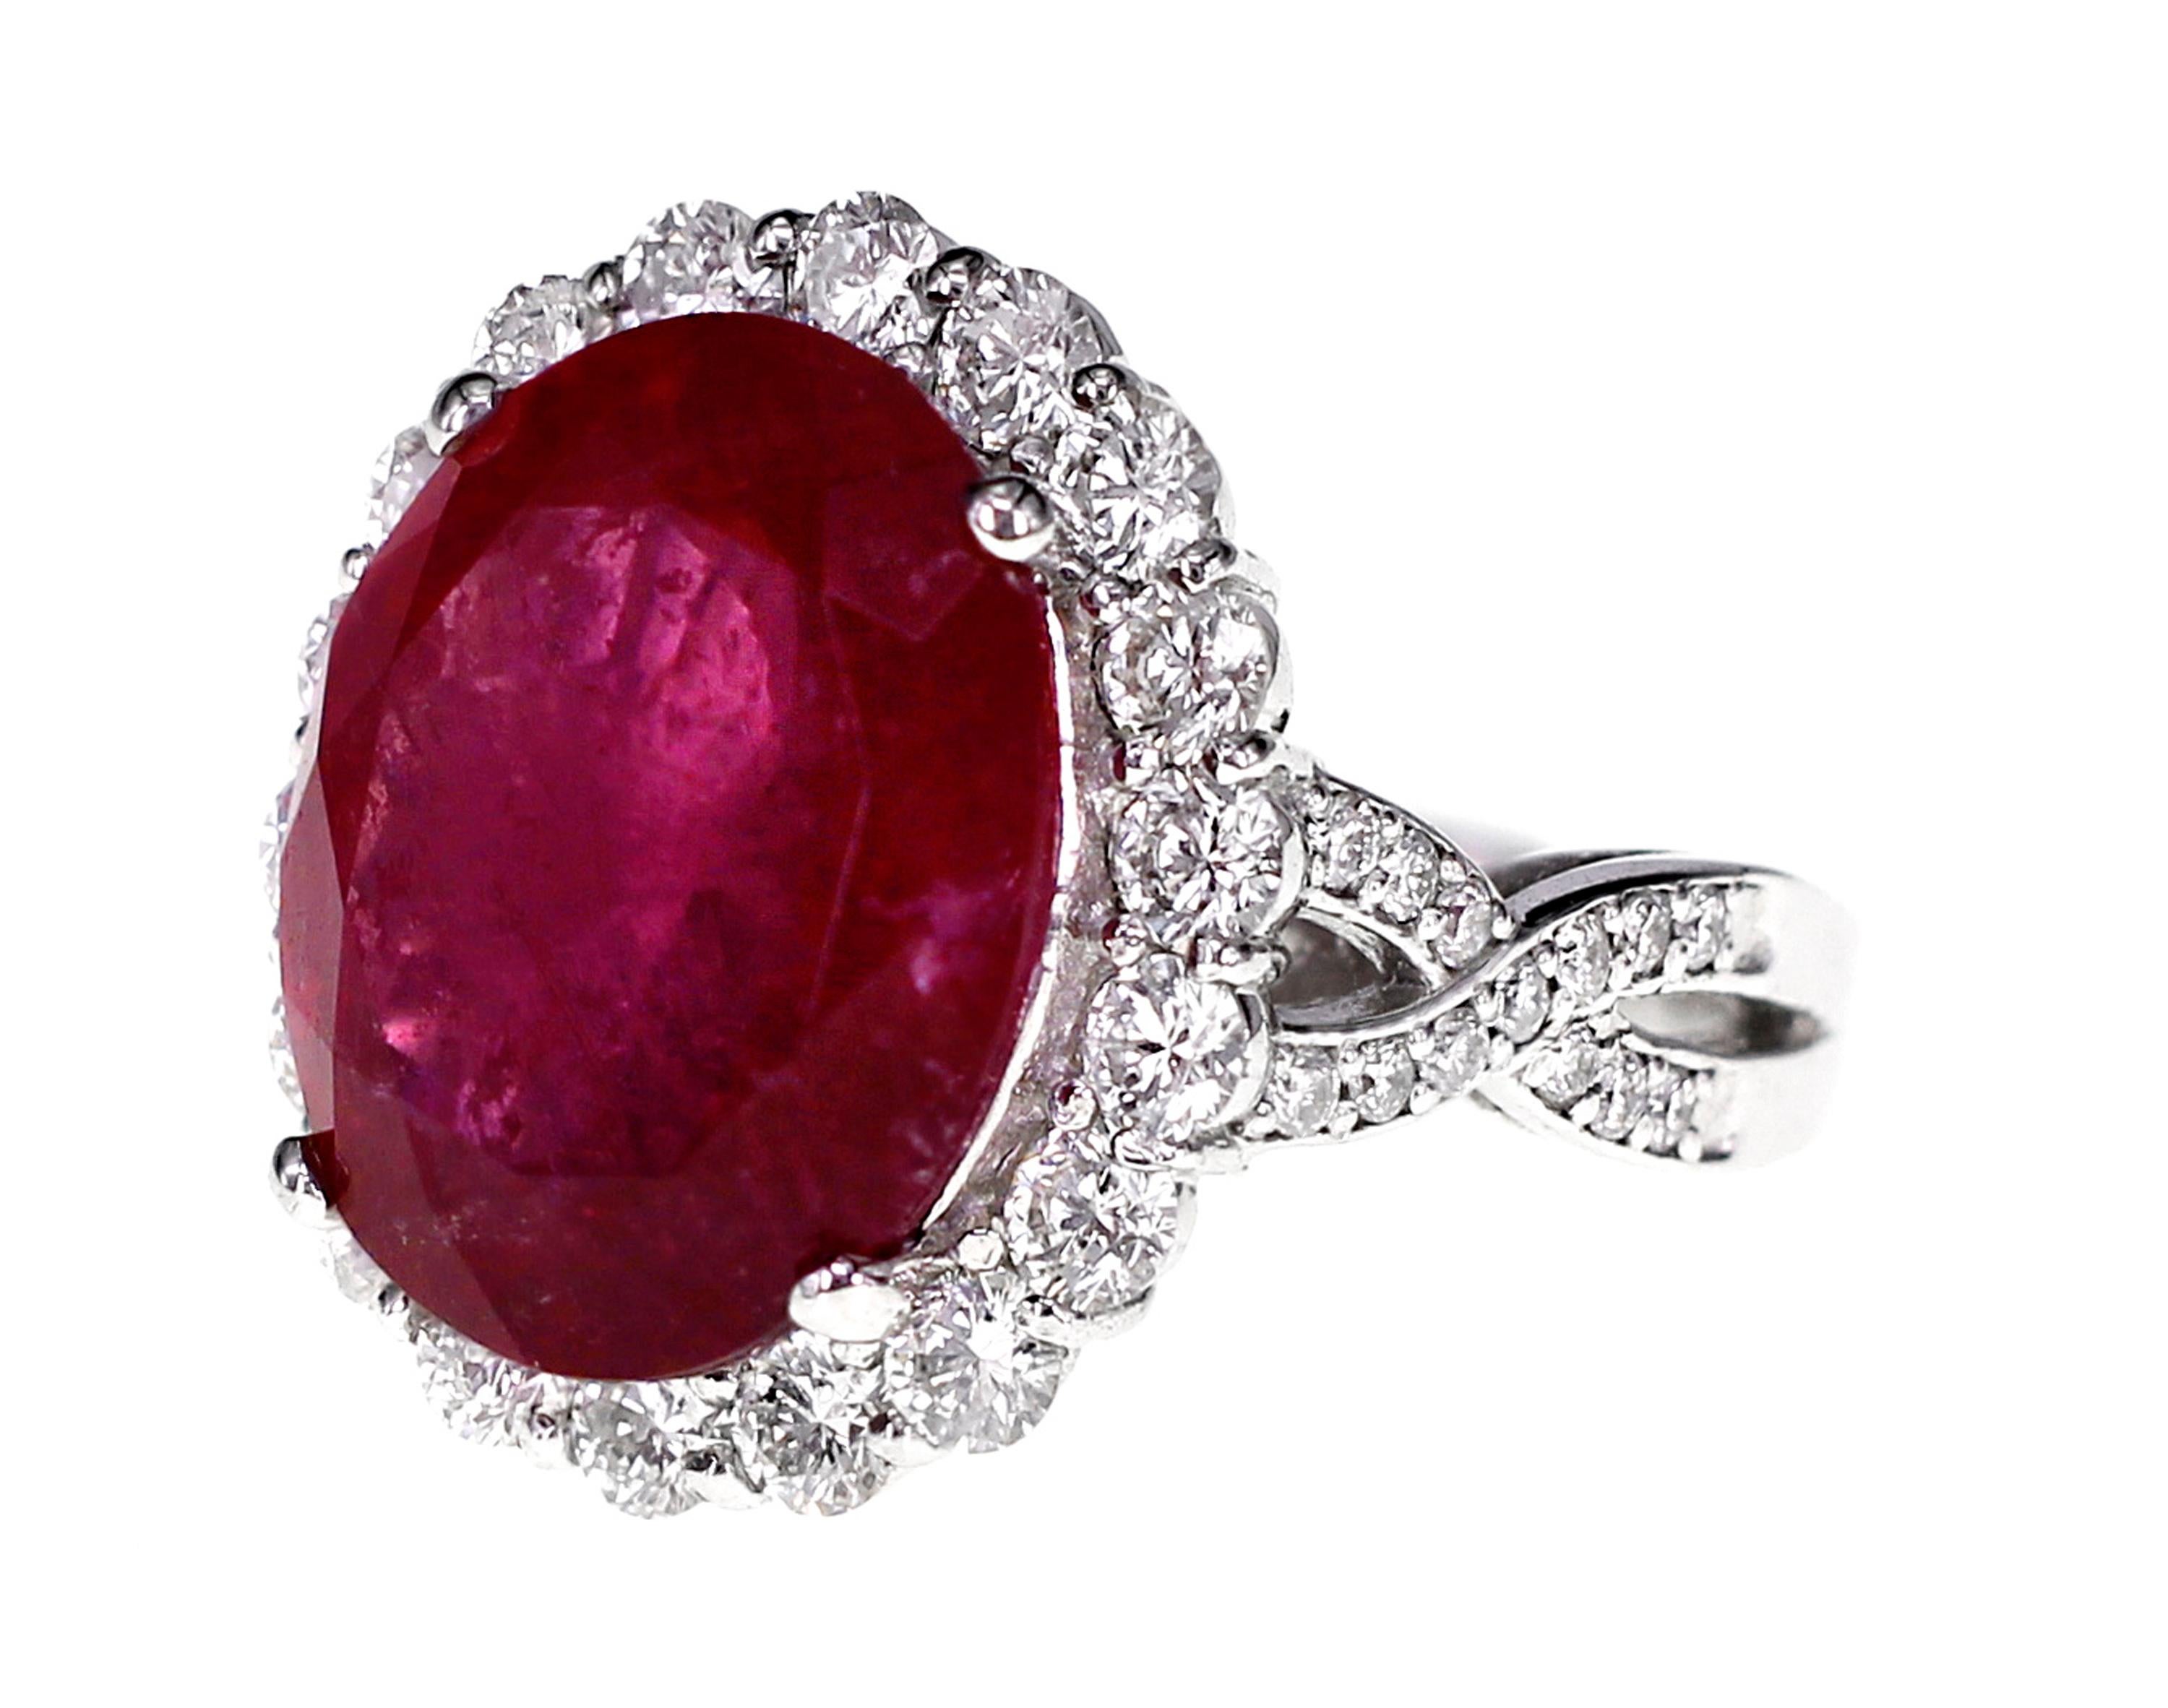 A 9.49 carat vivid red color Brazilian Rubellite is set with 1.68 carat of F color VS clarity white brilliant round diamond.
The image of the certificate can be found alongside the images of the ring. 
Ring Size : US 6.25
Ring size can be changed as